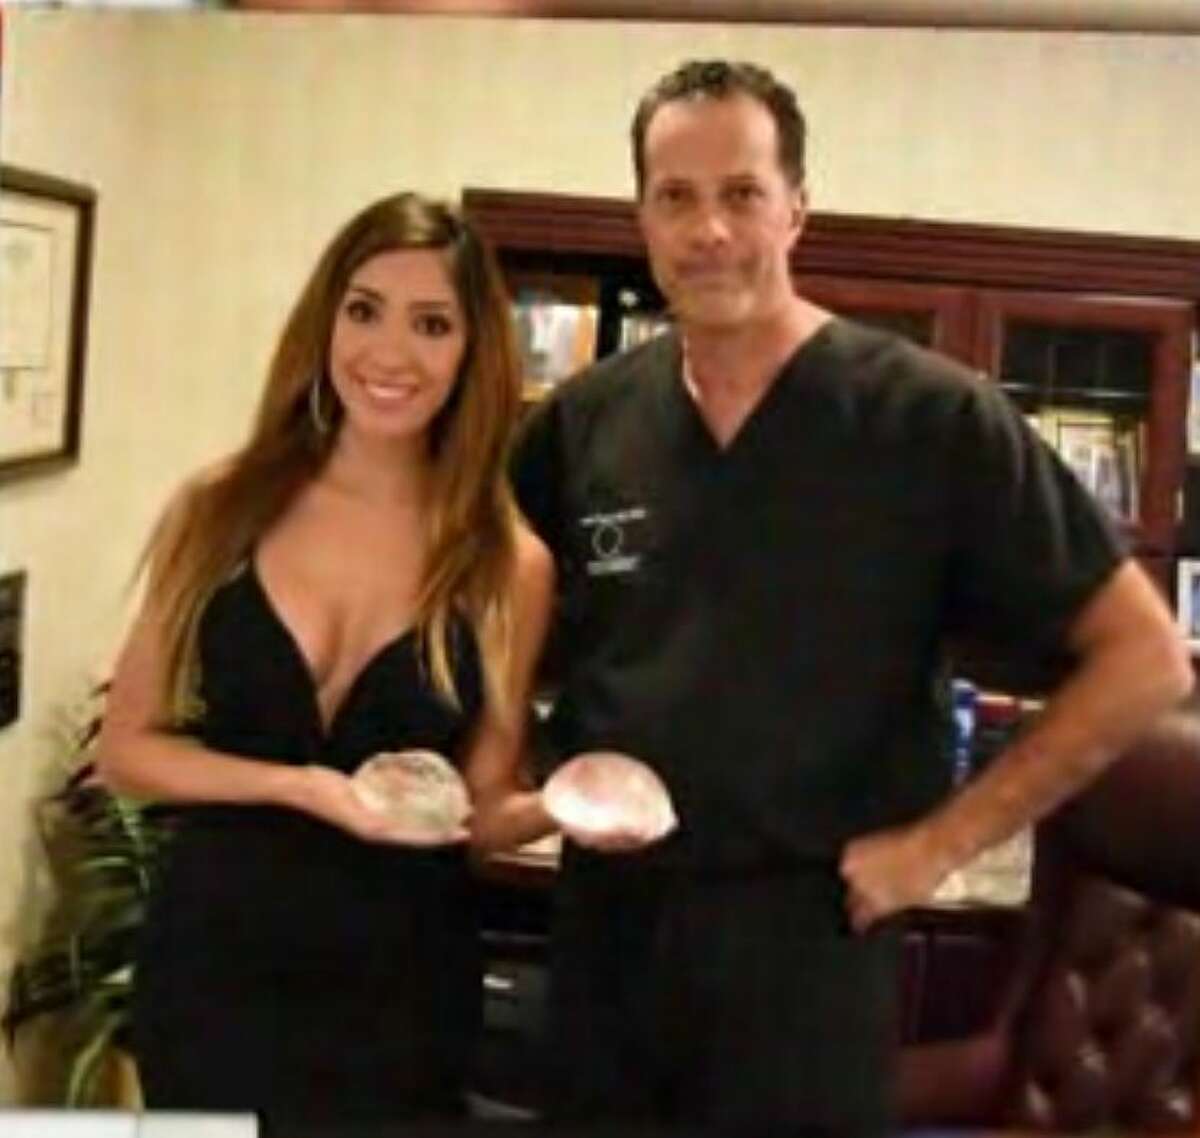 Farrah Abraham got a new set of breasts as part of her third breast augmentation surgery, giving people a peek into the operation and the final product.